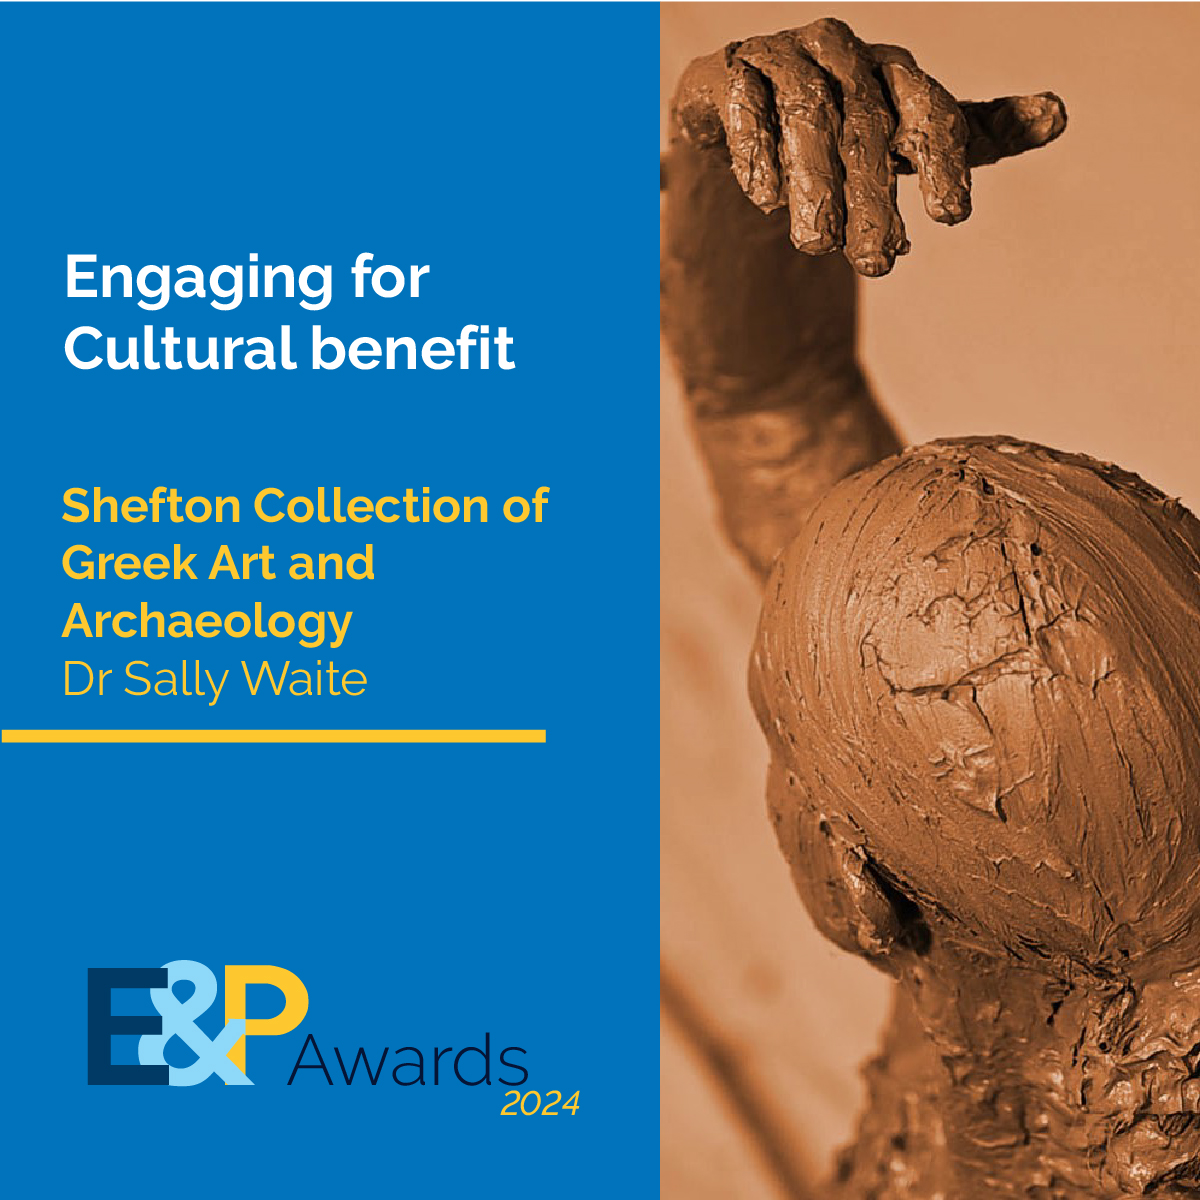 Here are our nominees for the Engaging for Cultural Benefit Award - @mjrichardson1, @vindolandatrust and @sallywaite2 👏 This category recognises collaborative projects that contribute to the vibrancy and cultural richness of our place. #WeAreNCL #EandPAwardsNCL